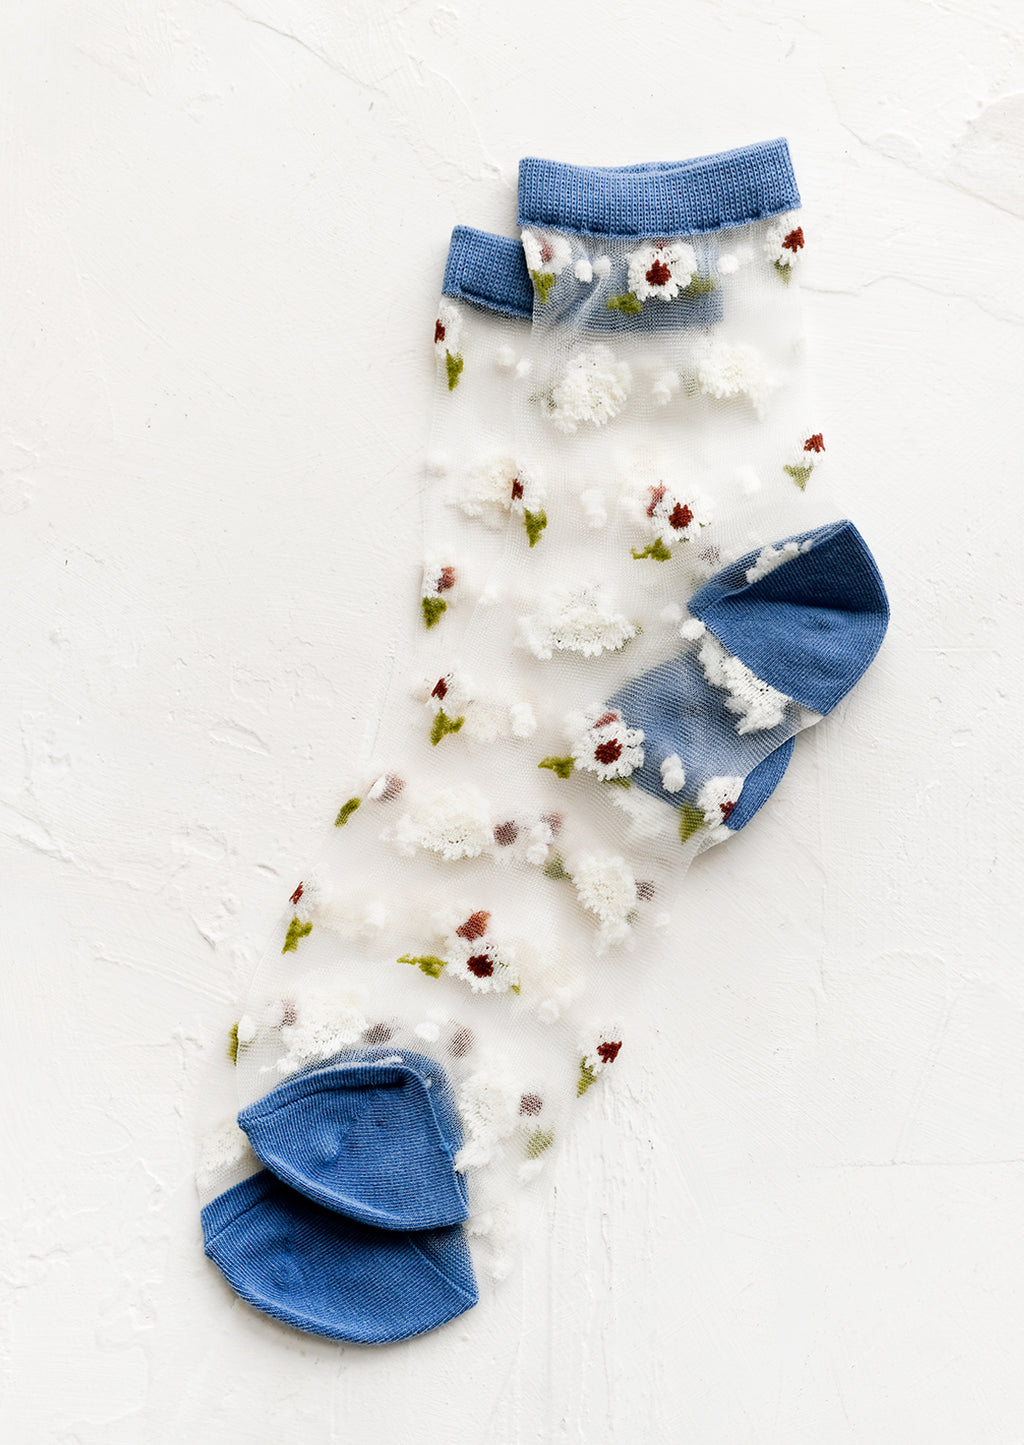 Storm Blue: Sheer ankle socks with floral print and blue trim.